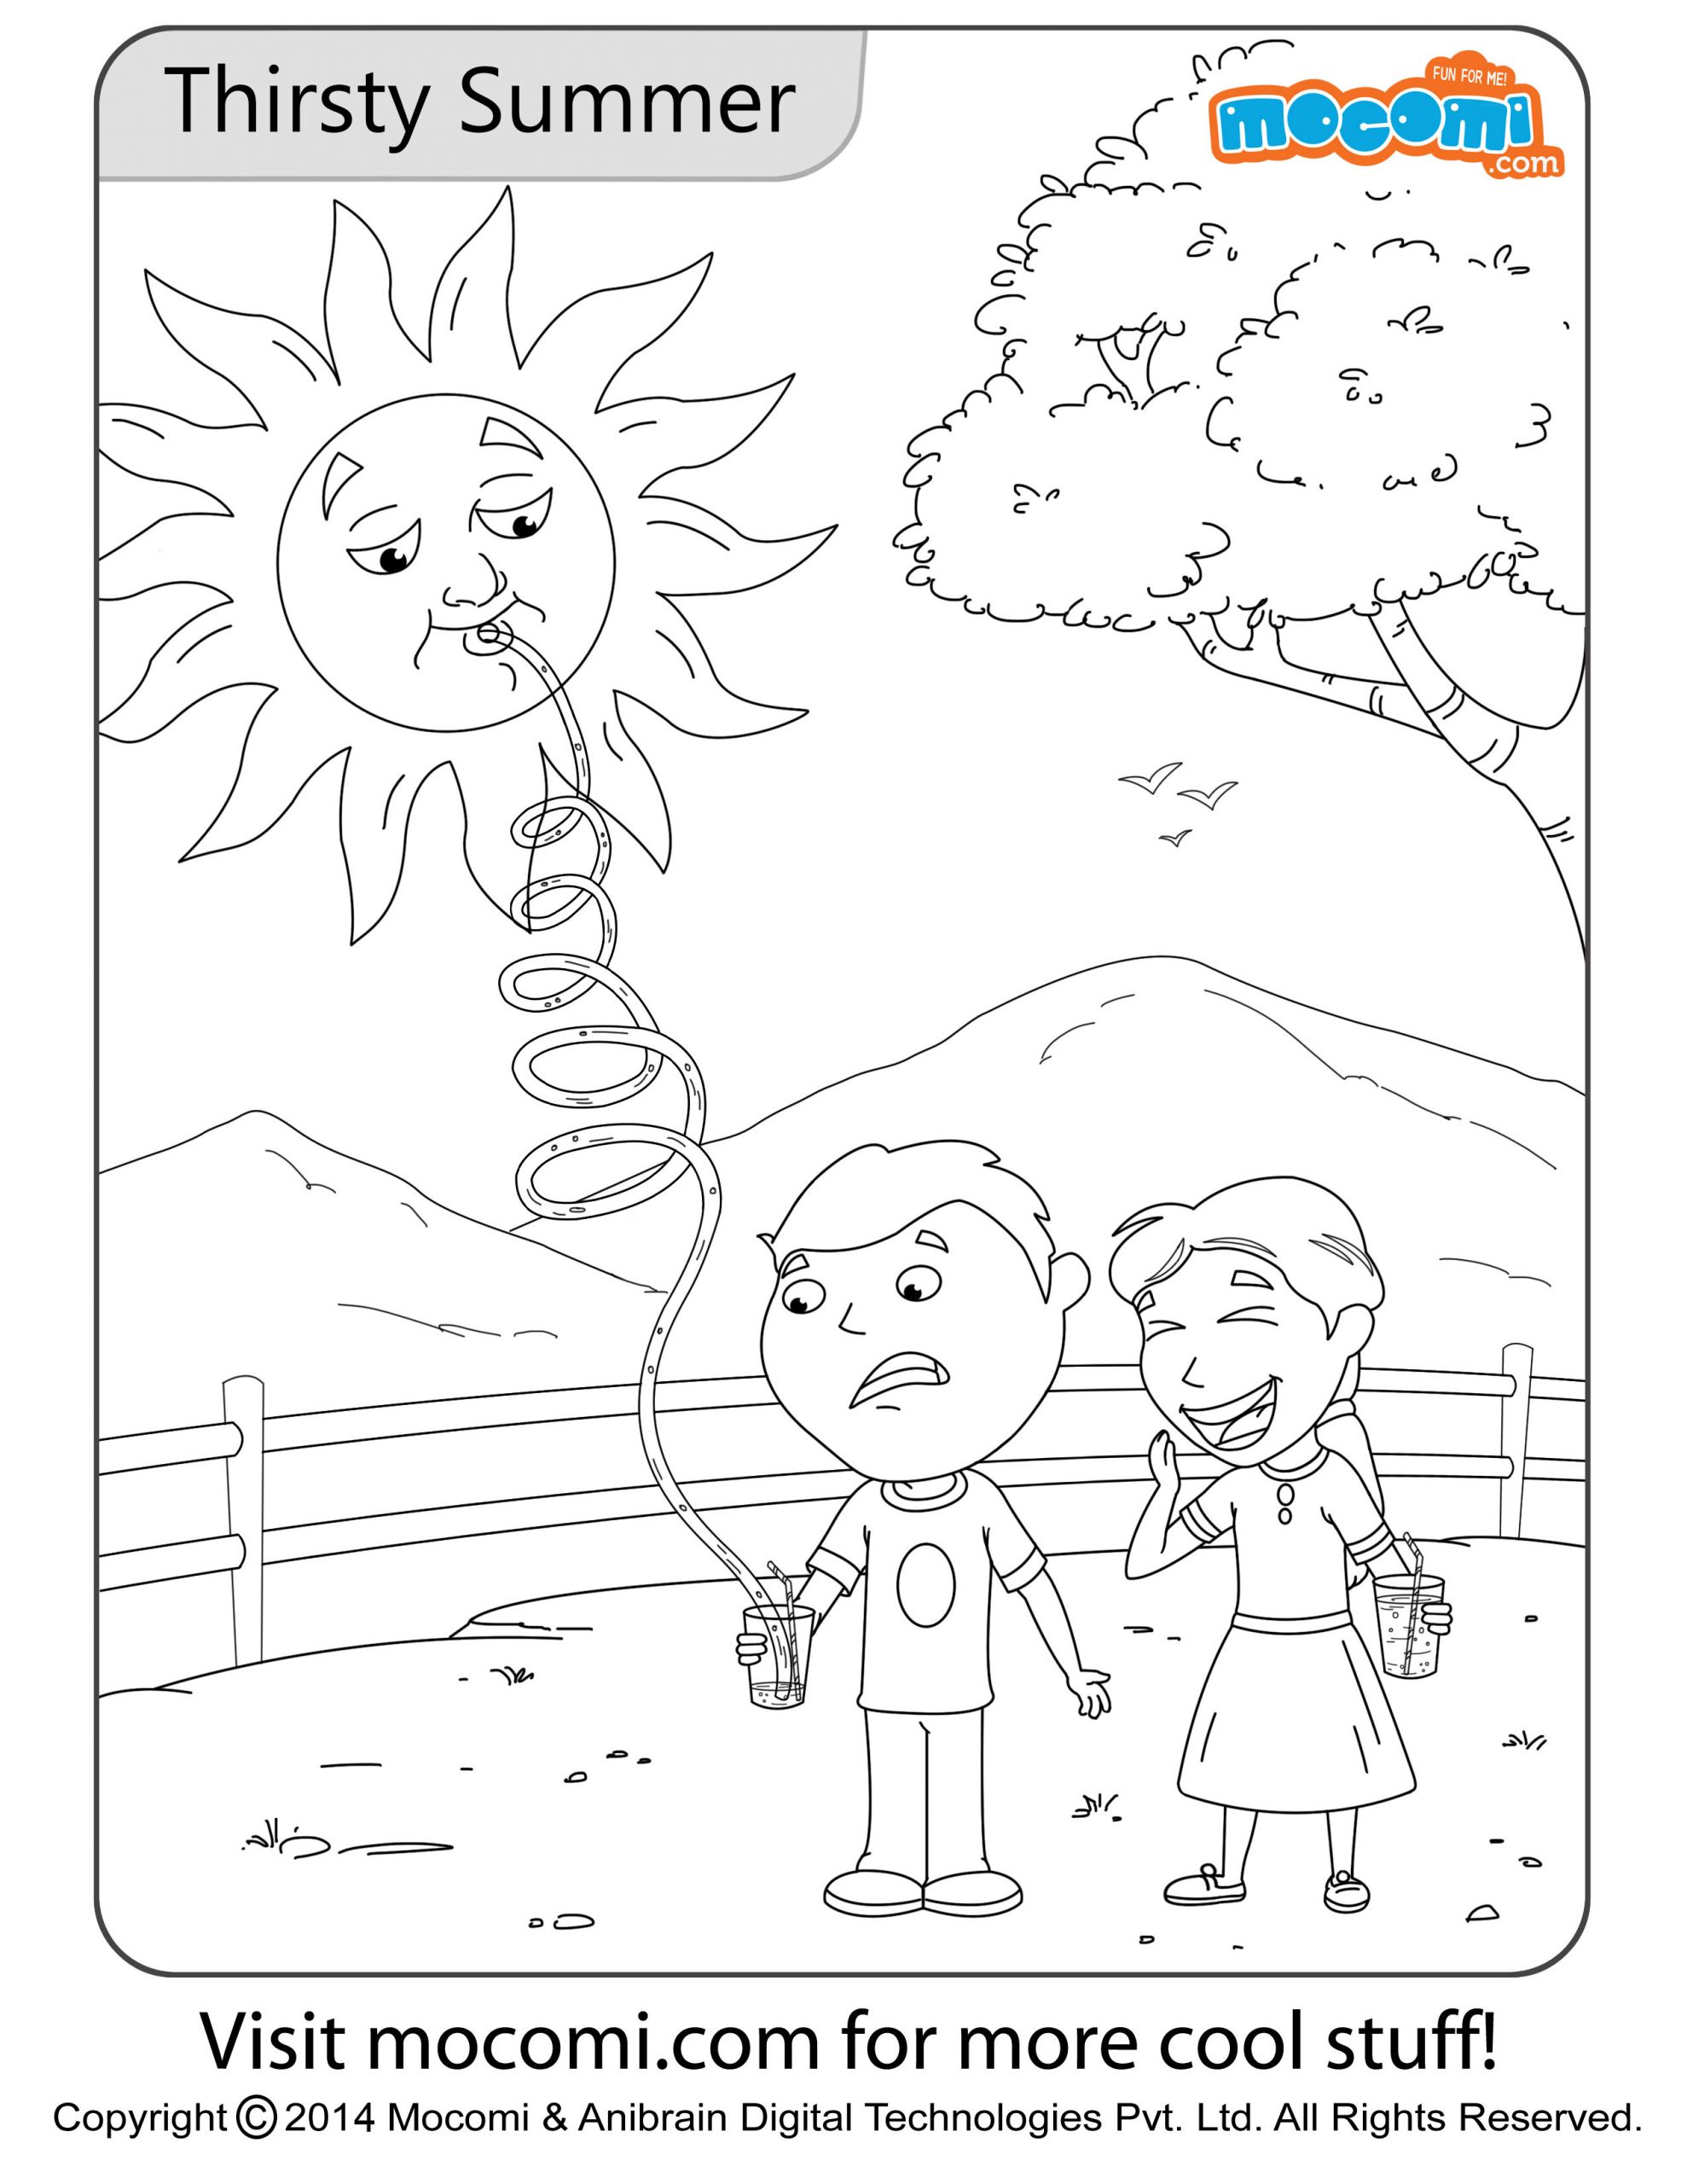 Fun Coloring Sheets For Kids
 Thirsty Summer Colouring Page Jojo Colouring Pages for